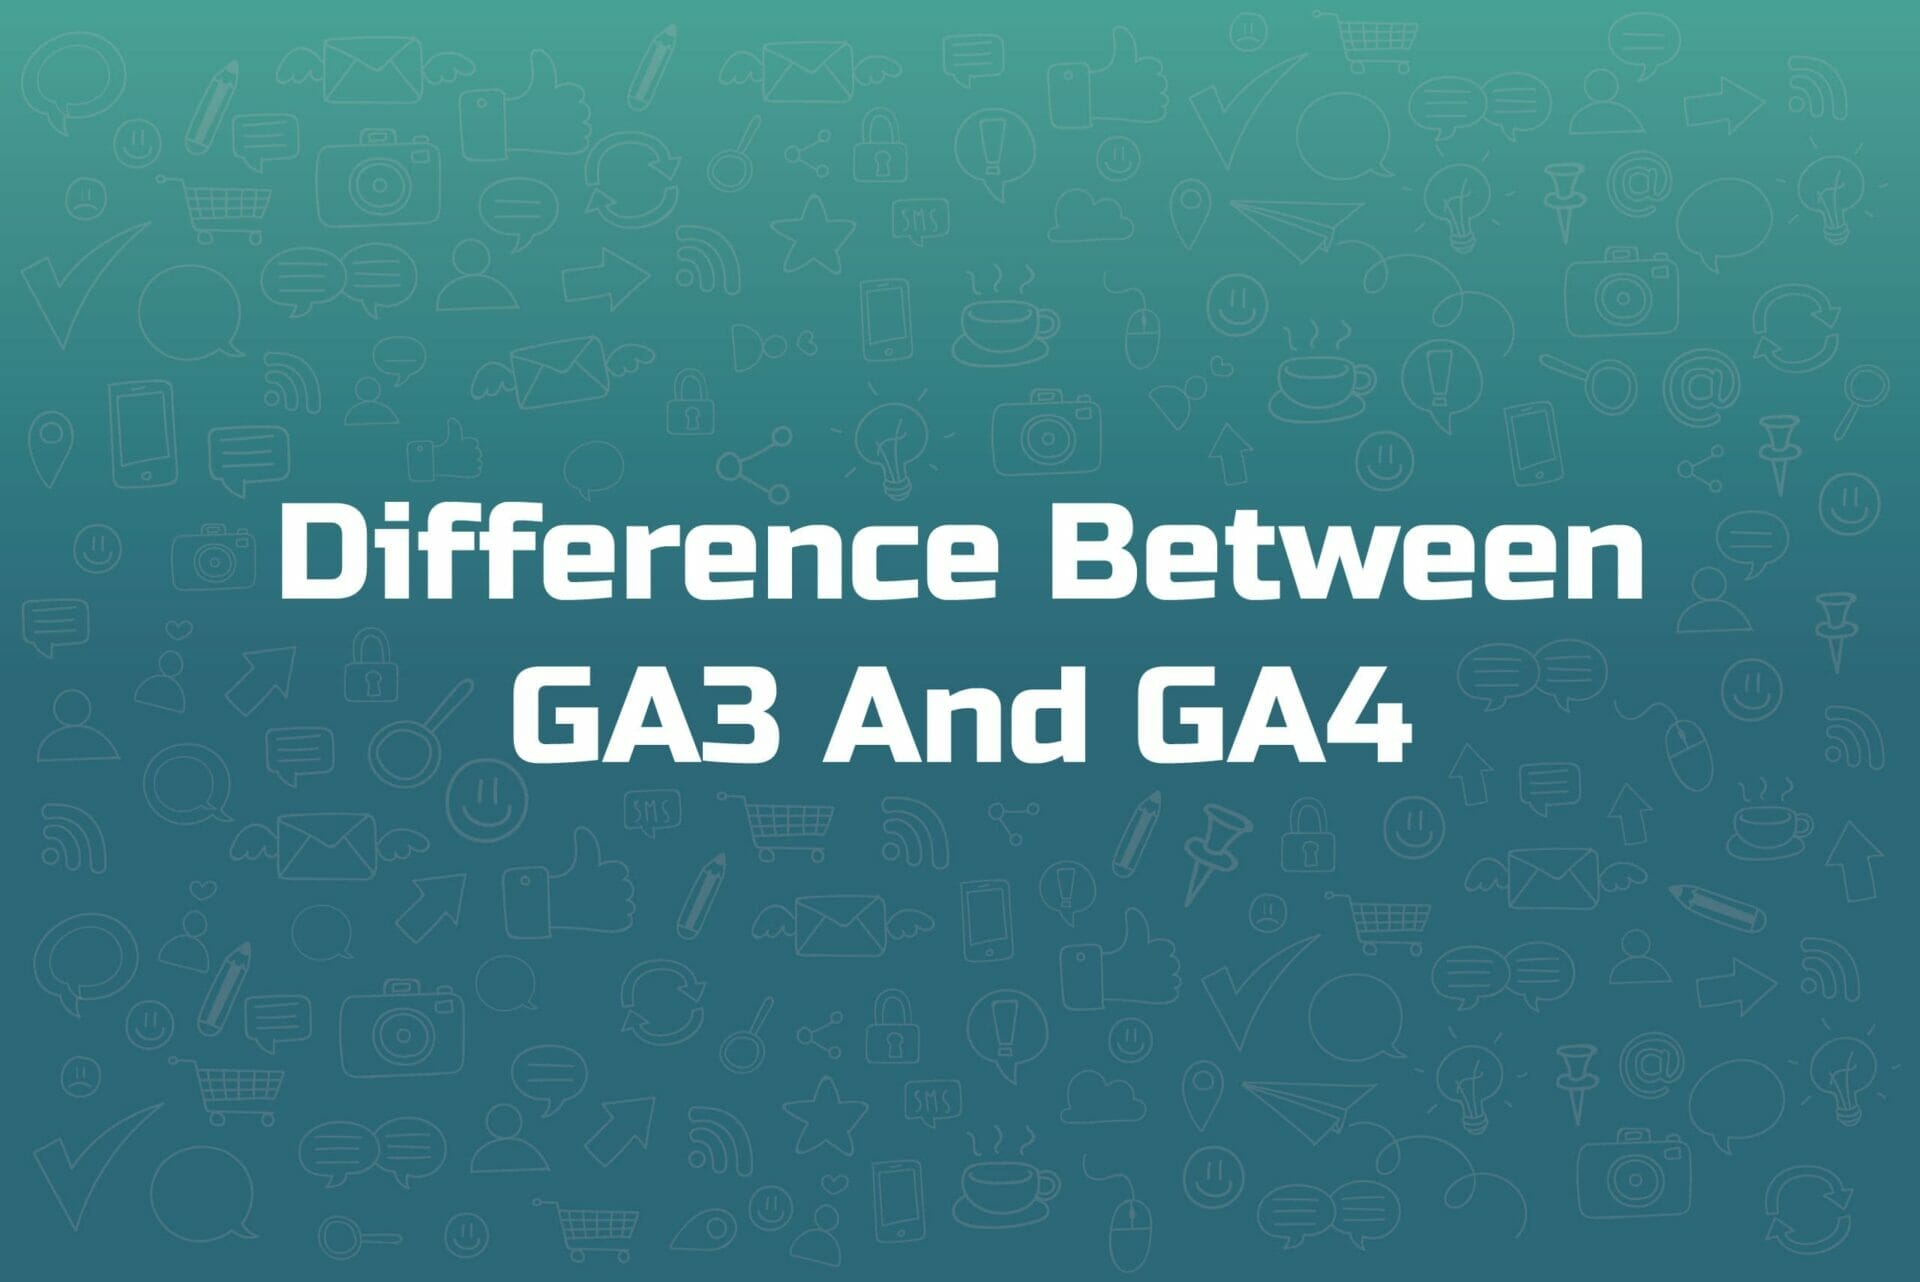 Difference between GA3 and GA4